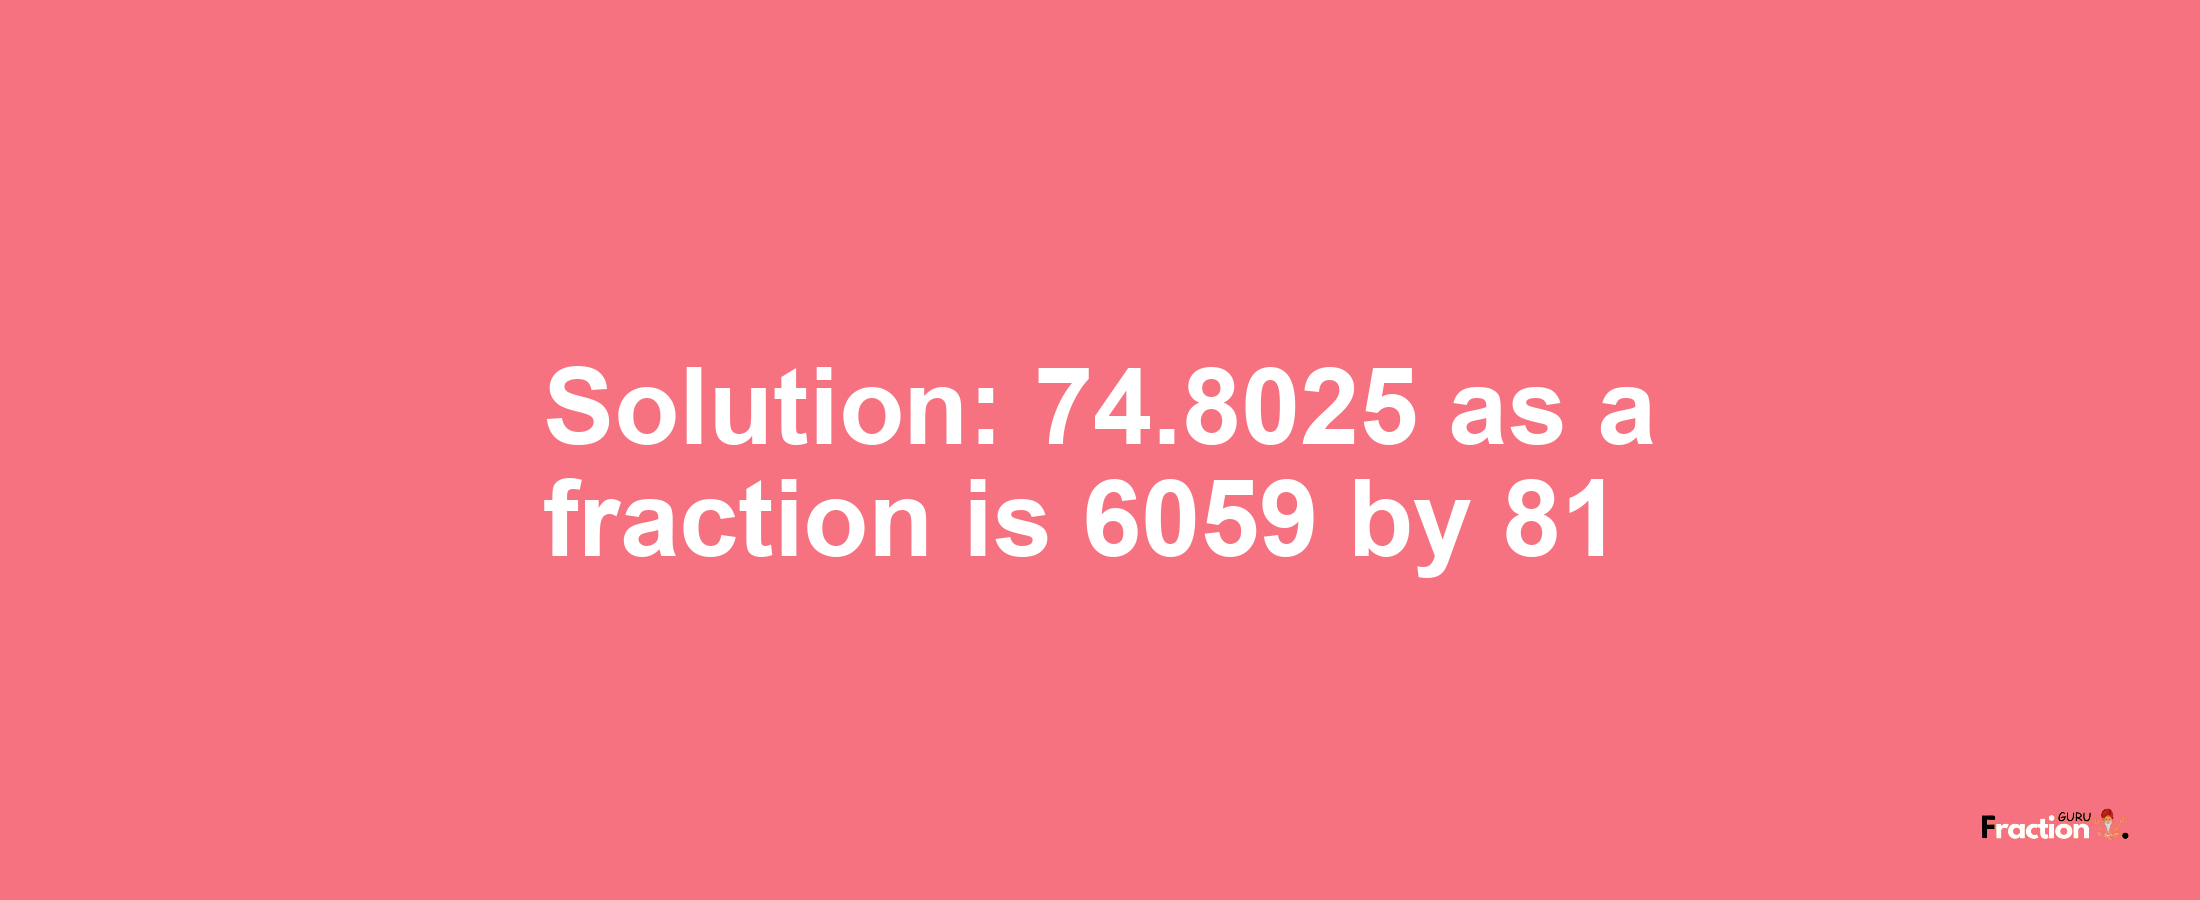 Solution:74.8025 as a fraction is 6059/81